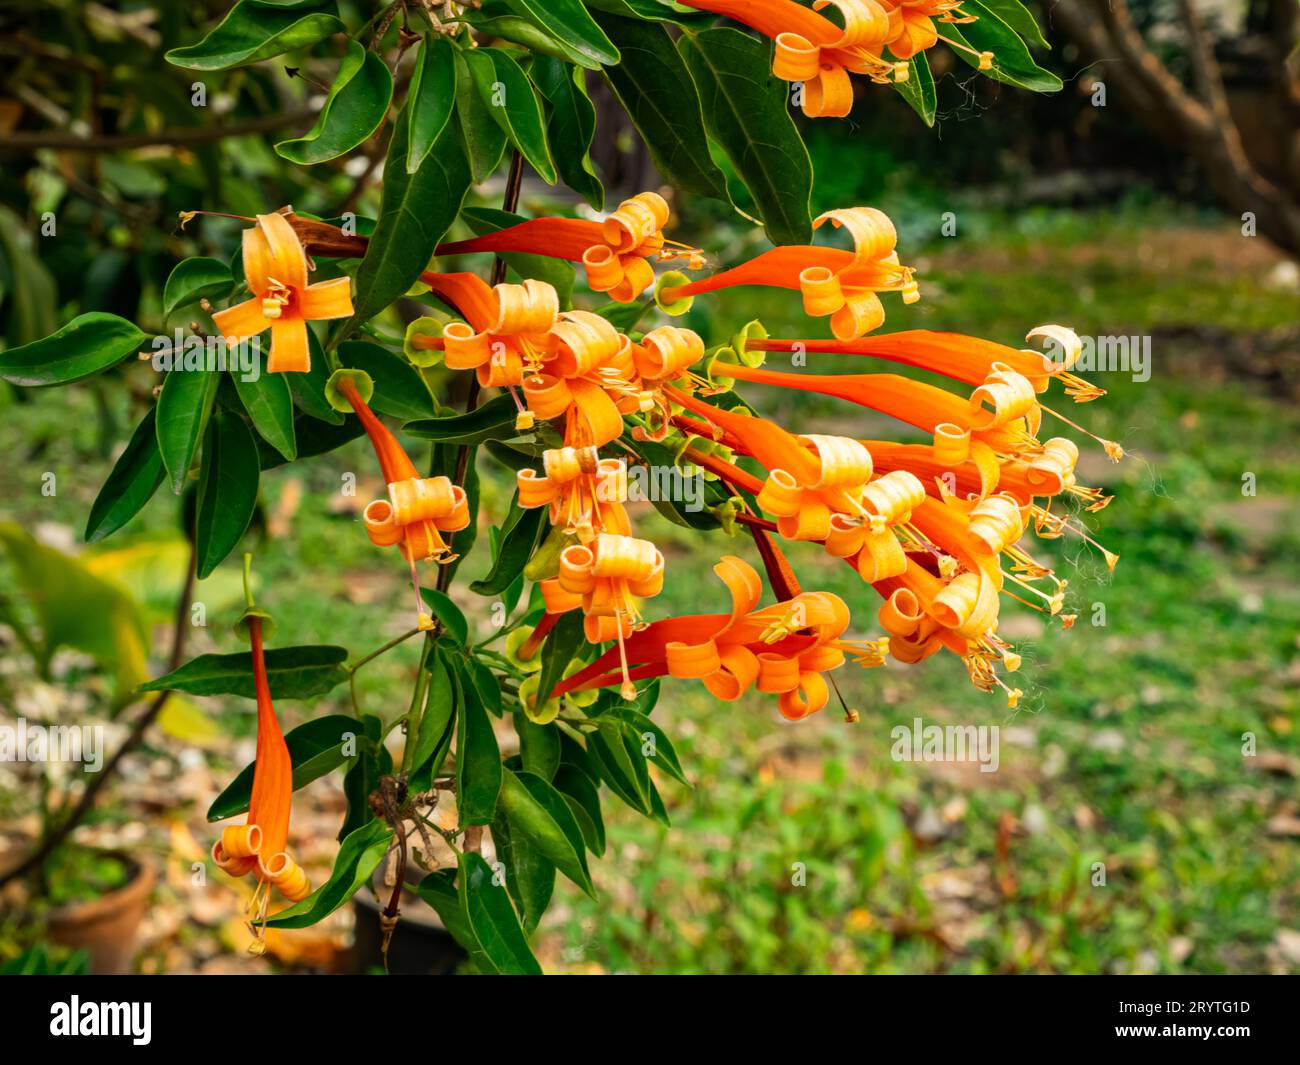 Group of blooming orange trumpet flowers or Pyrostergia venusta hanging in a vine. Stock Photo